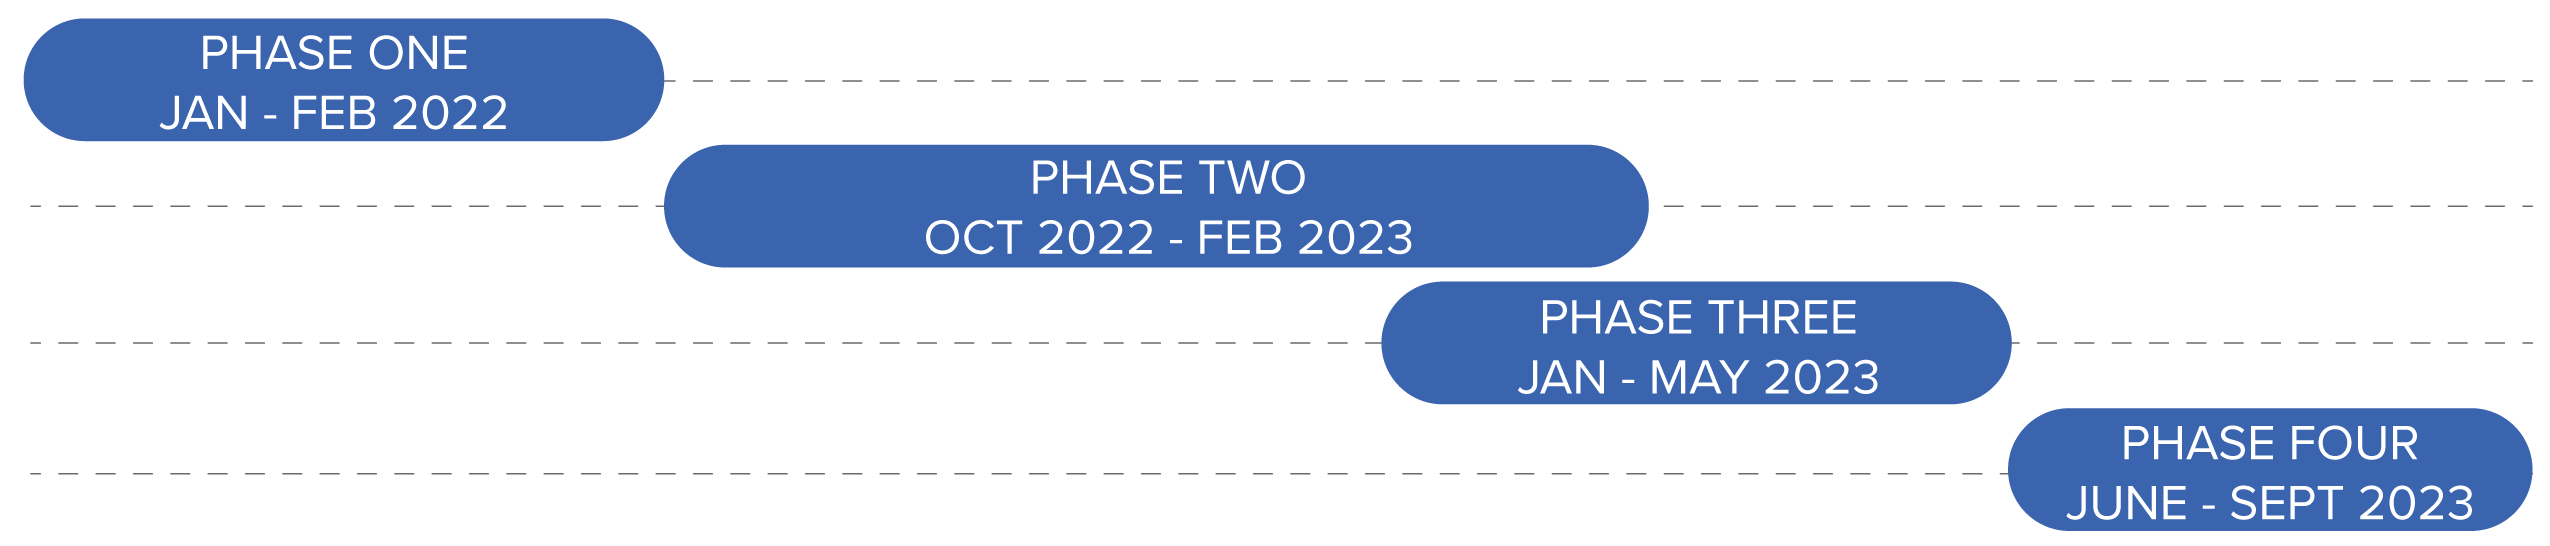 Notional Schedule graphic depicting the four phases of the ACE Portal Modernization